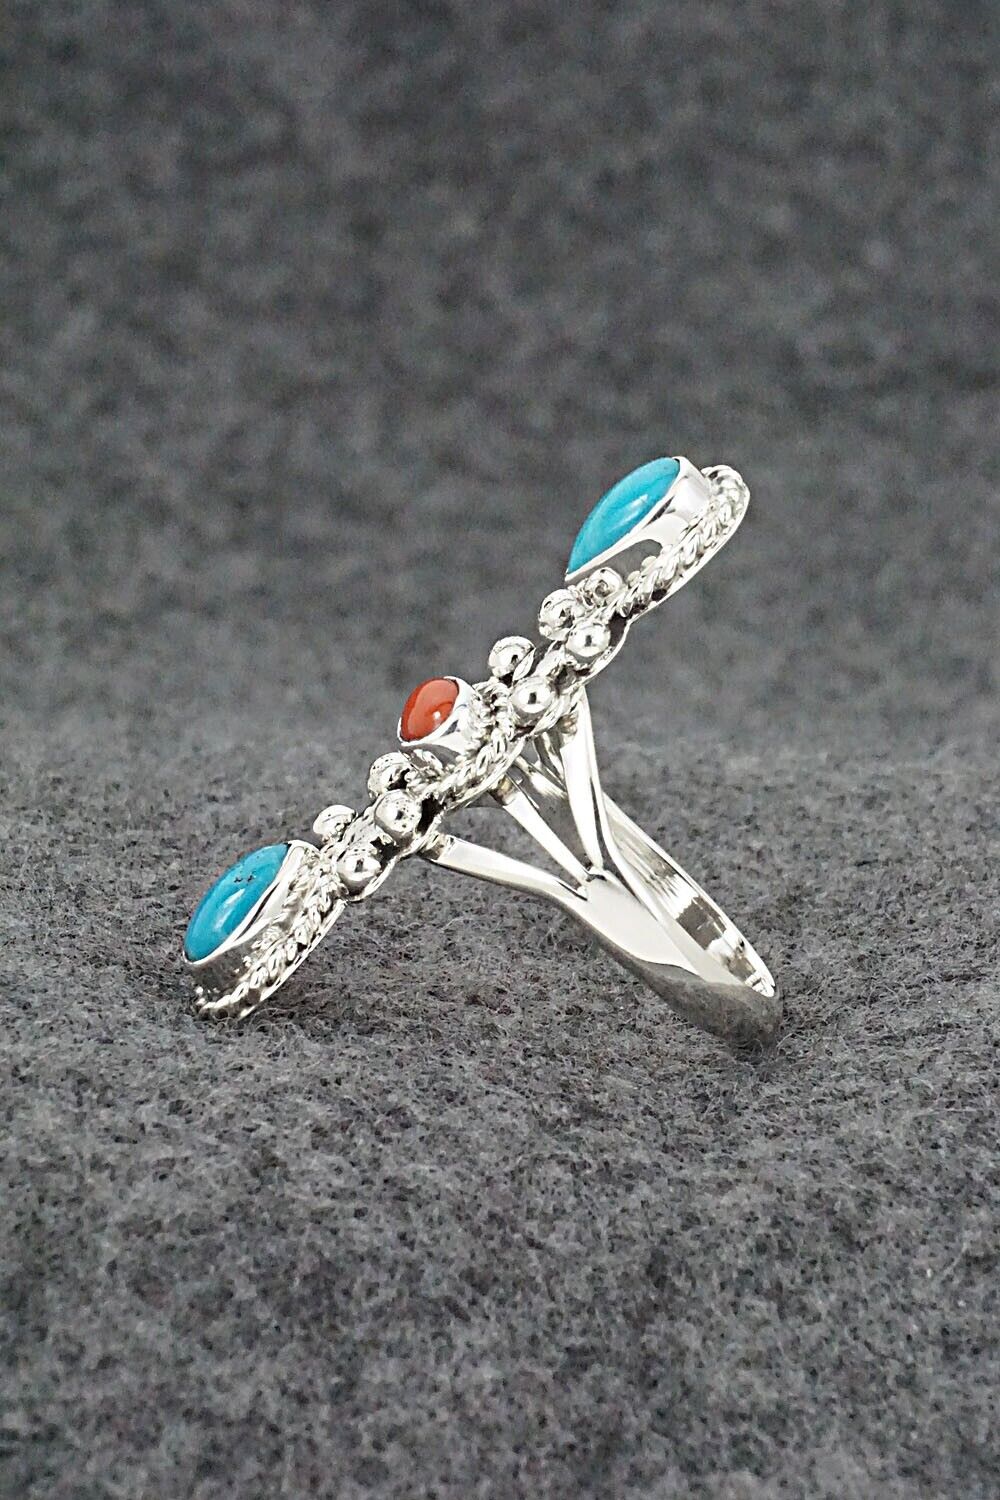 Turquoise, Coral & Sterling Silver Ring - Andrew Vandever - Size 8